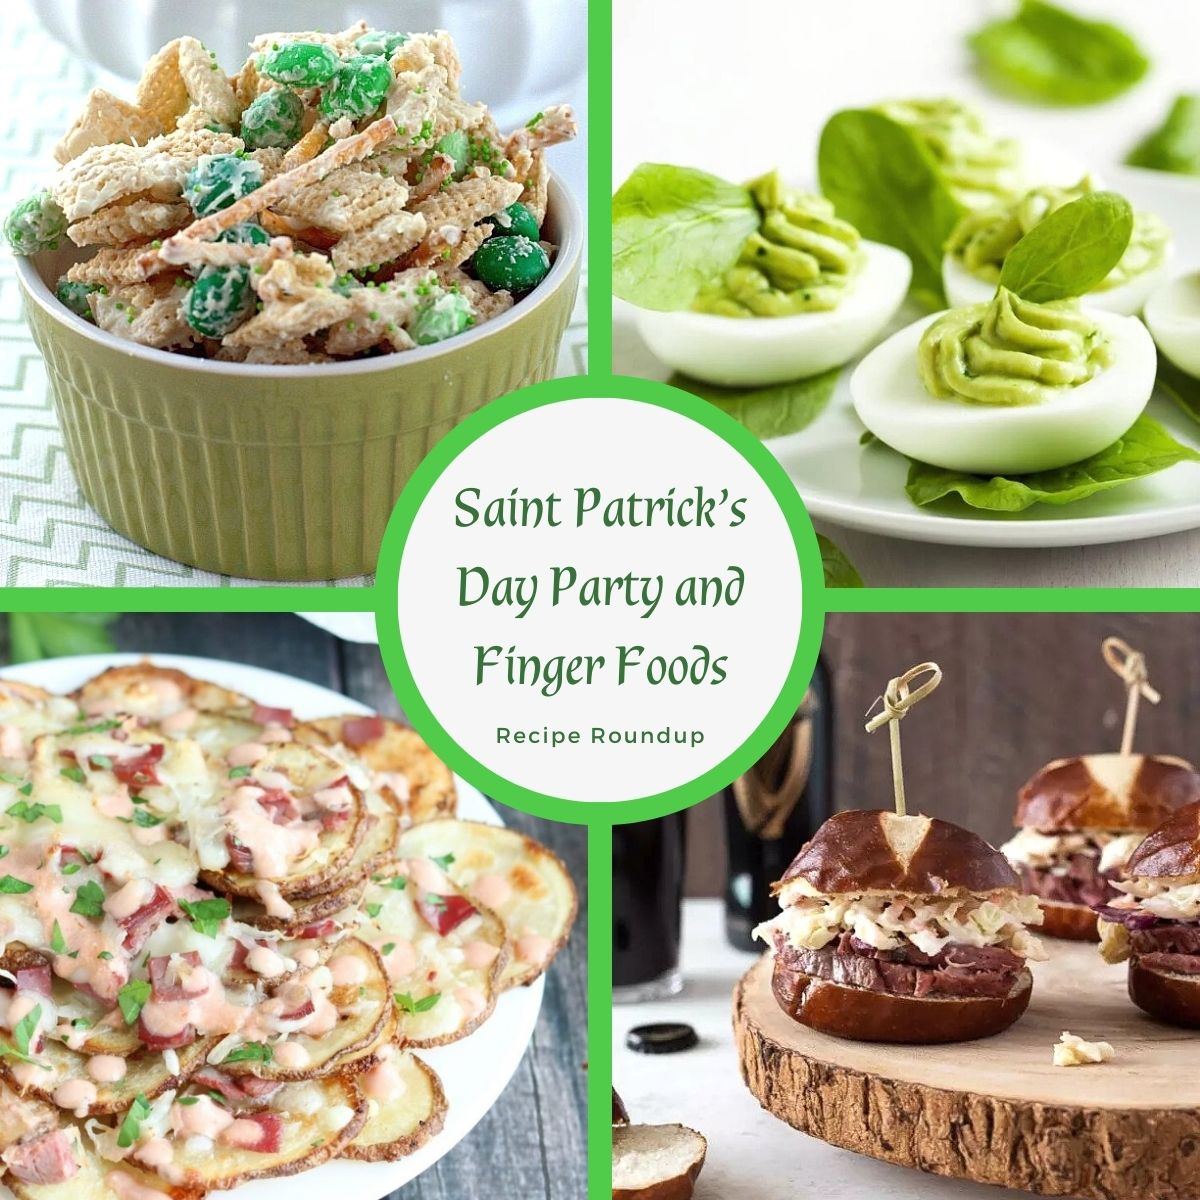 Green Goodness: Get Inspired for Your St. Patrick's Day Party with Classic Irish Fare and Creative Snacks